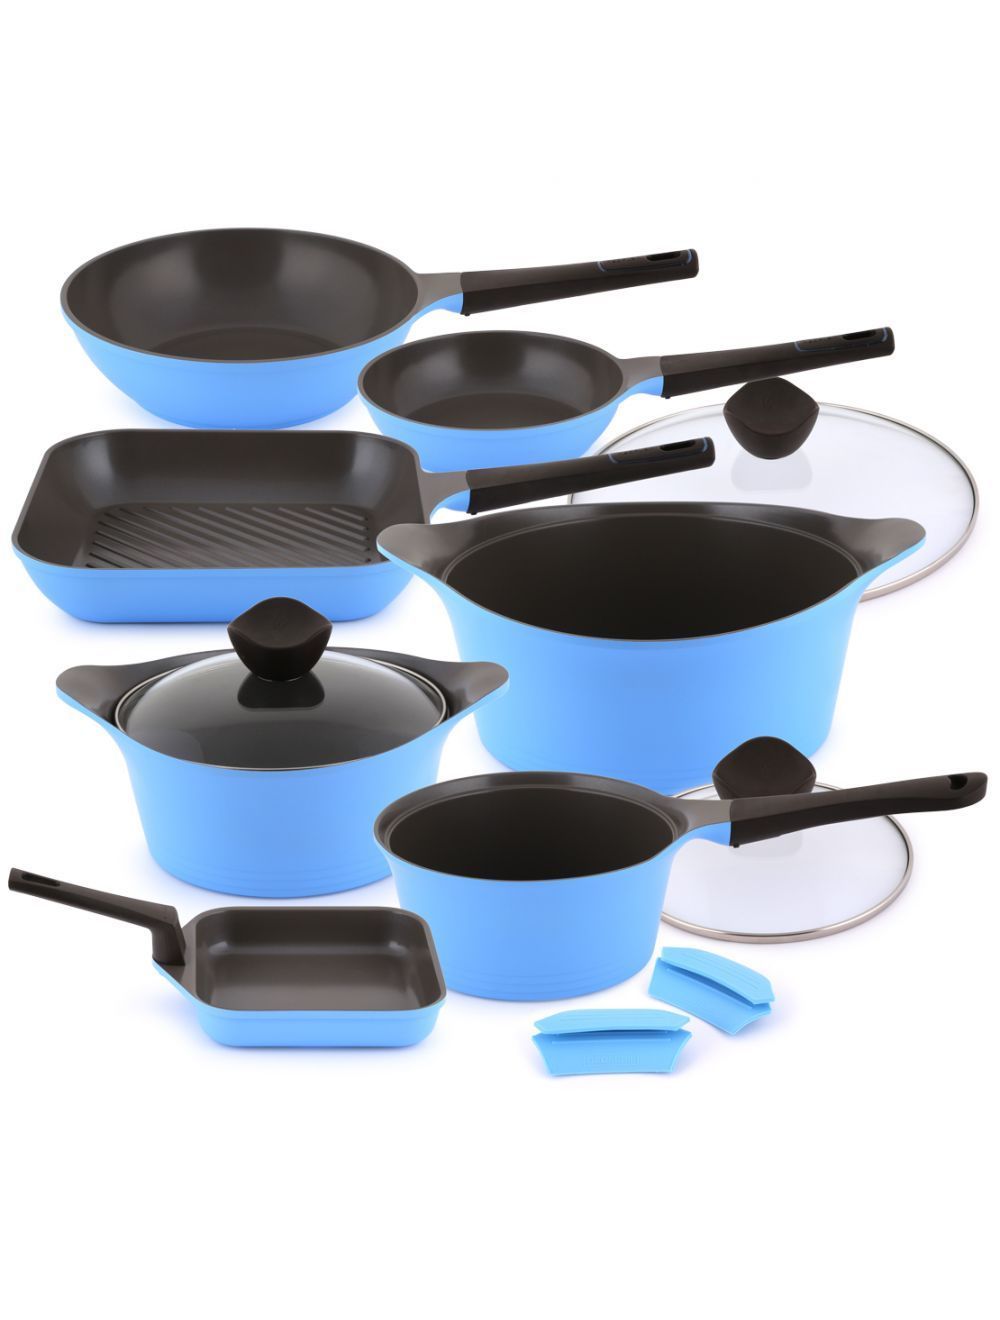 Neoflam Granite Cookware Set 11 Pieces